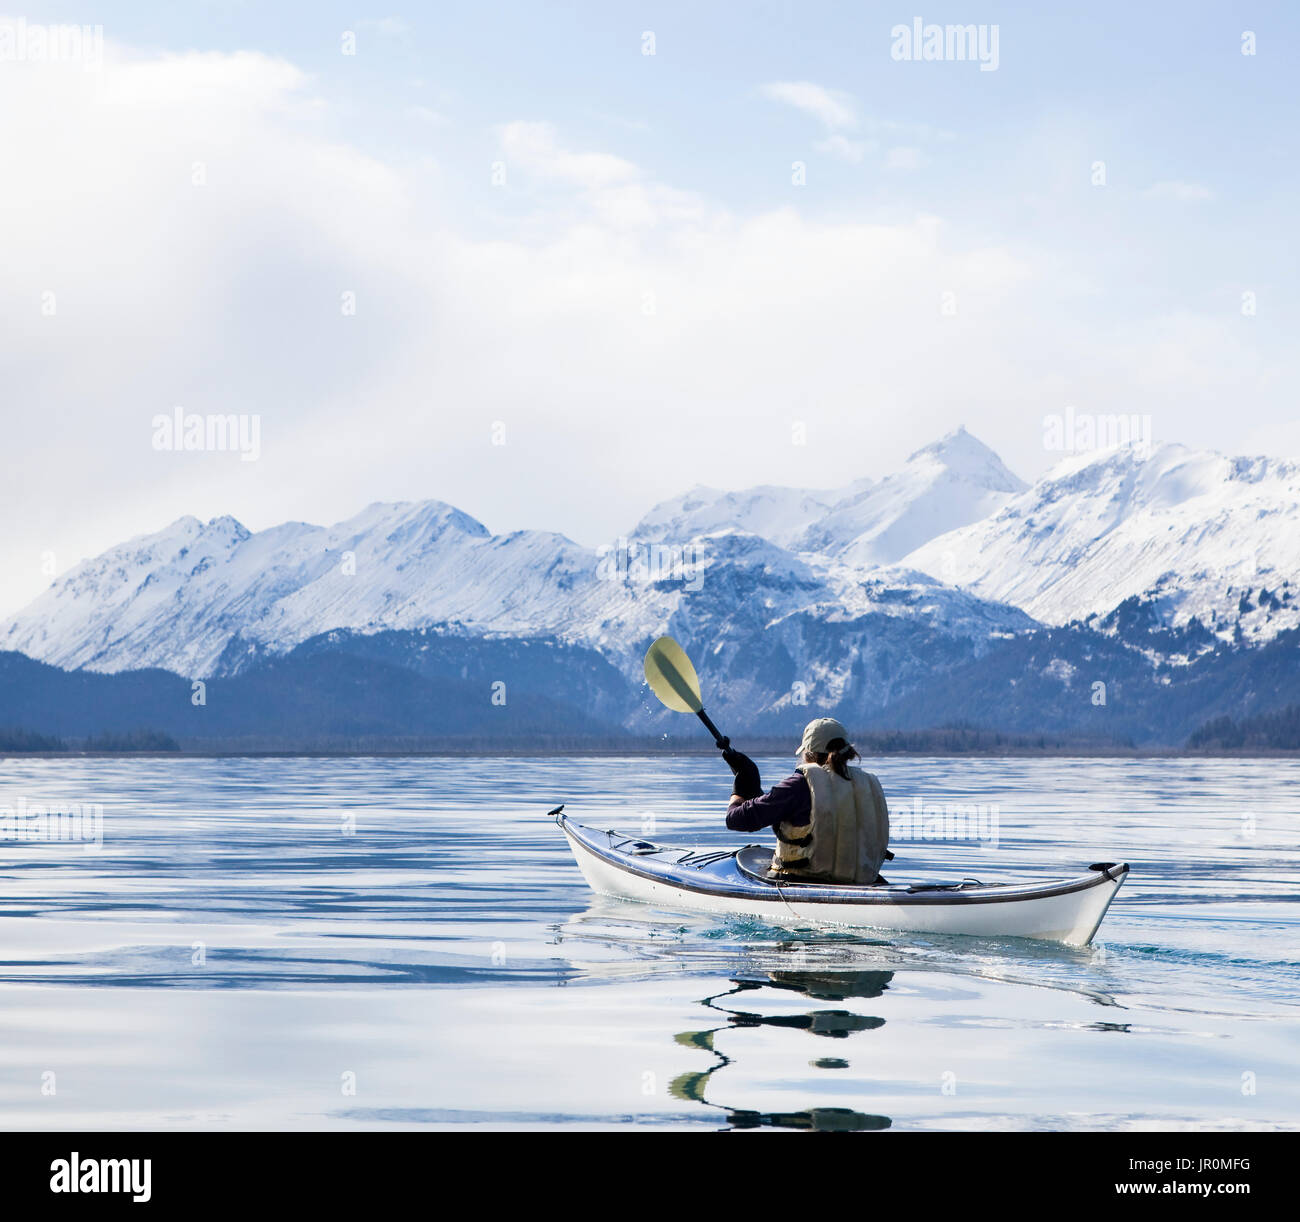 Paddling In A Canoe On Tranquil Water With A View Of The Snow Capped Kenai Mountains, Kachemak Bay State Park; Alaska, United States Of America Stock Photo